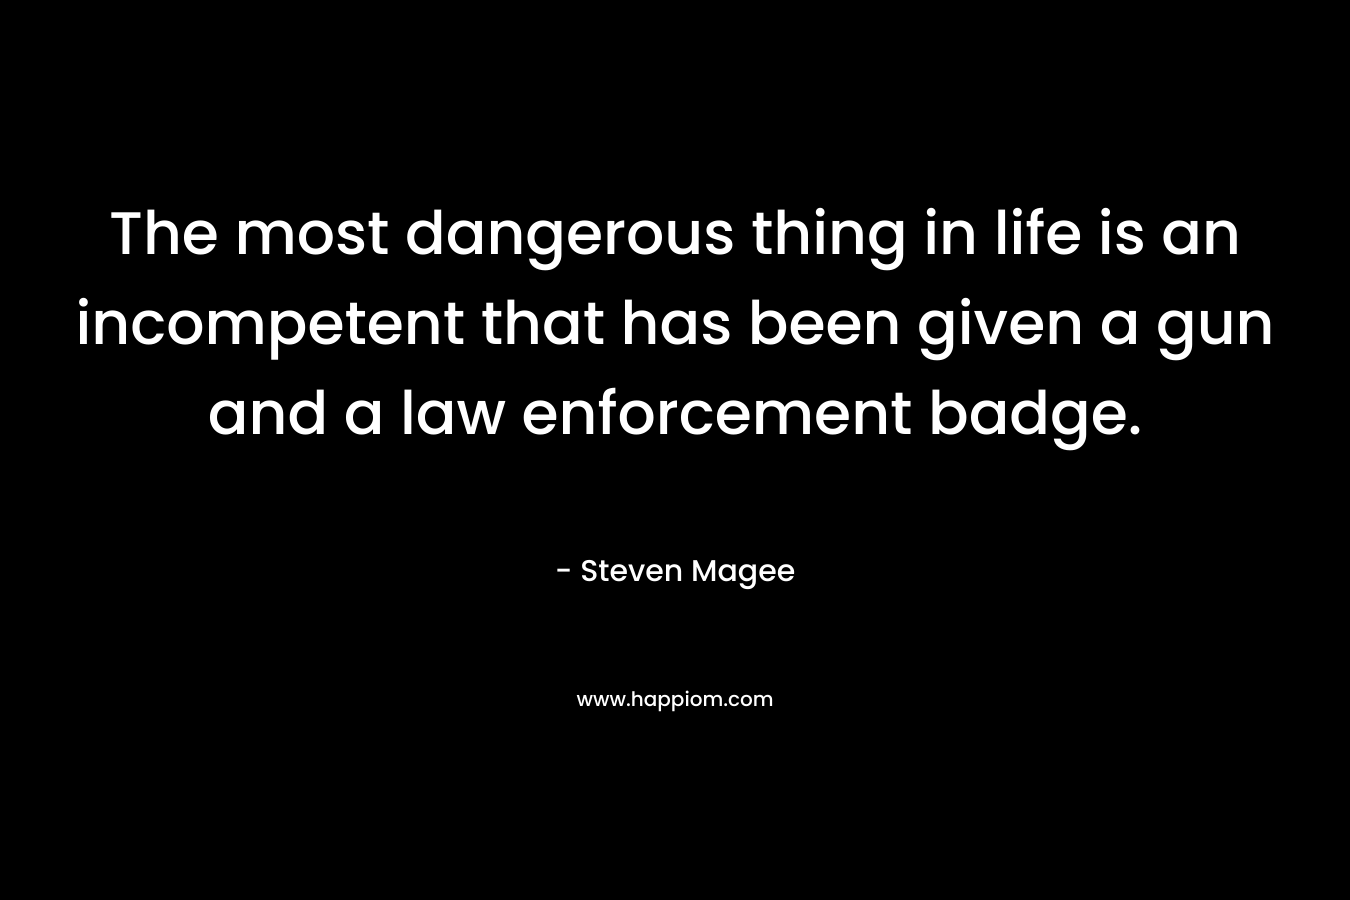 The most dangerous thing in life is an incompetent that has been given a gun and a law enforcement badge. – Steven Magee